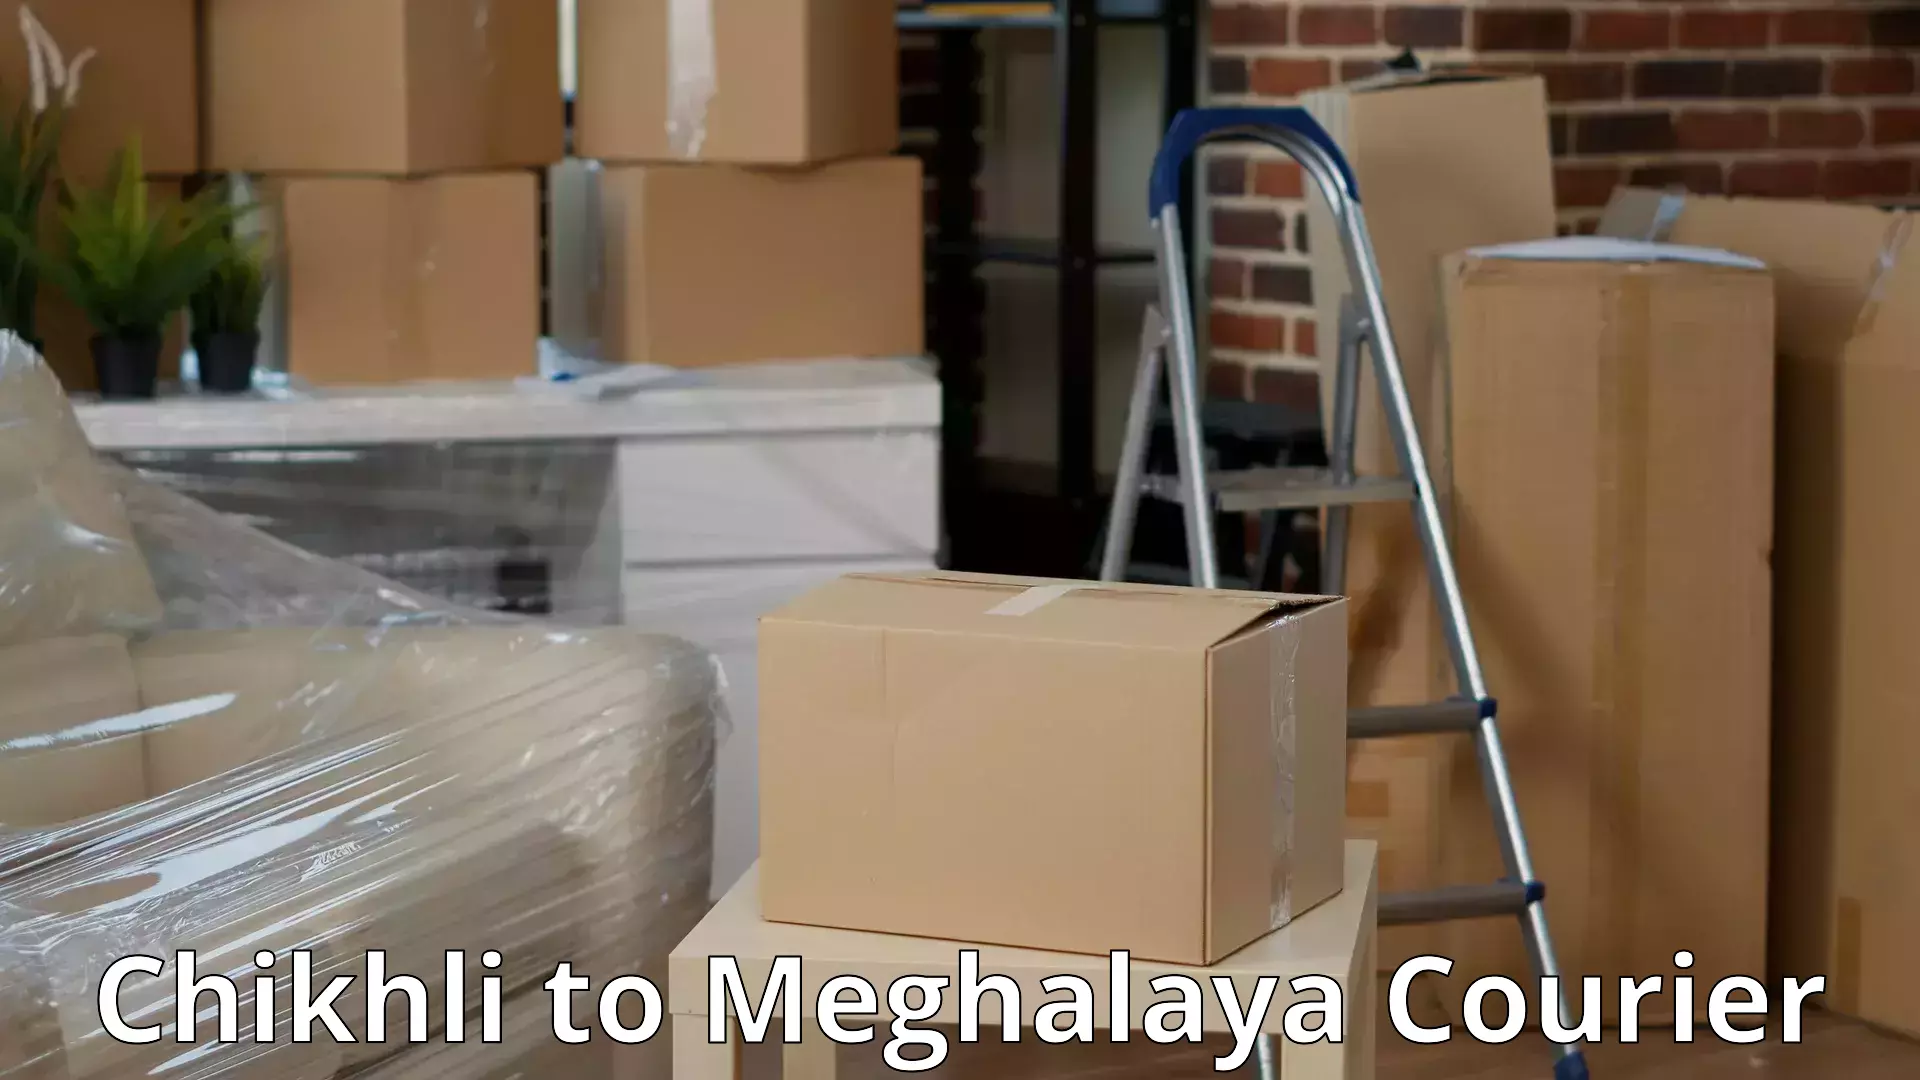 Furniture moving specialists Chikhli to Meghalaya